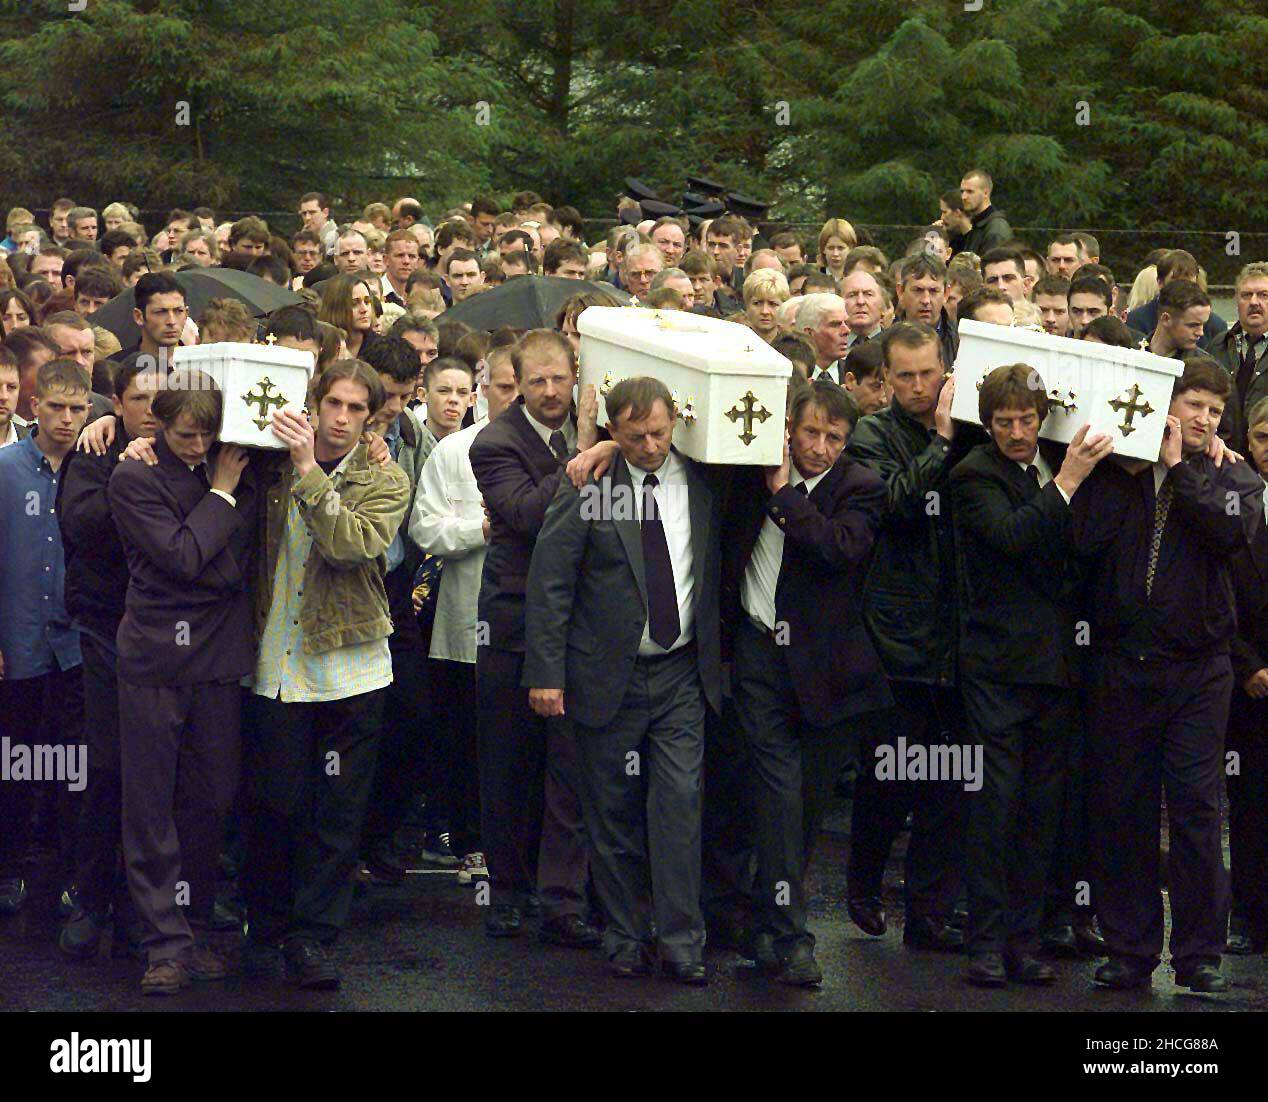 File photo dated 14/07/98 of the three coffins of brothers Richard, Mark, Jason Quinn, who were killed in a sectarian arson attack, being carried by family and mourners to Rasharkin Church for burial after leaving funeral mass at the Church of Our Lady and St Patricks, Ballymoney. Prime Minister Tony Blair told the head of the Orange Order to call for an immediate end to the Drumcree parading dispute hours after three young brothers were killed in a loyalist firebomb attack, according to newly released documents from the National Archives. Issue date: Wednesday December 29, 2021. Stock Photo